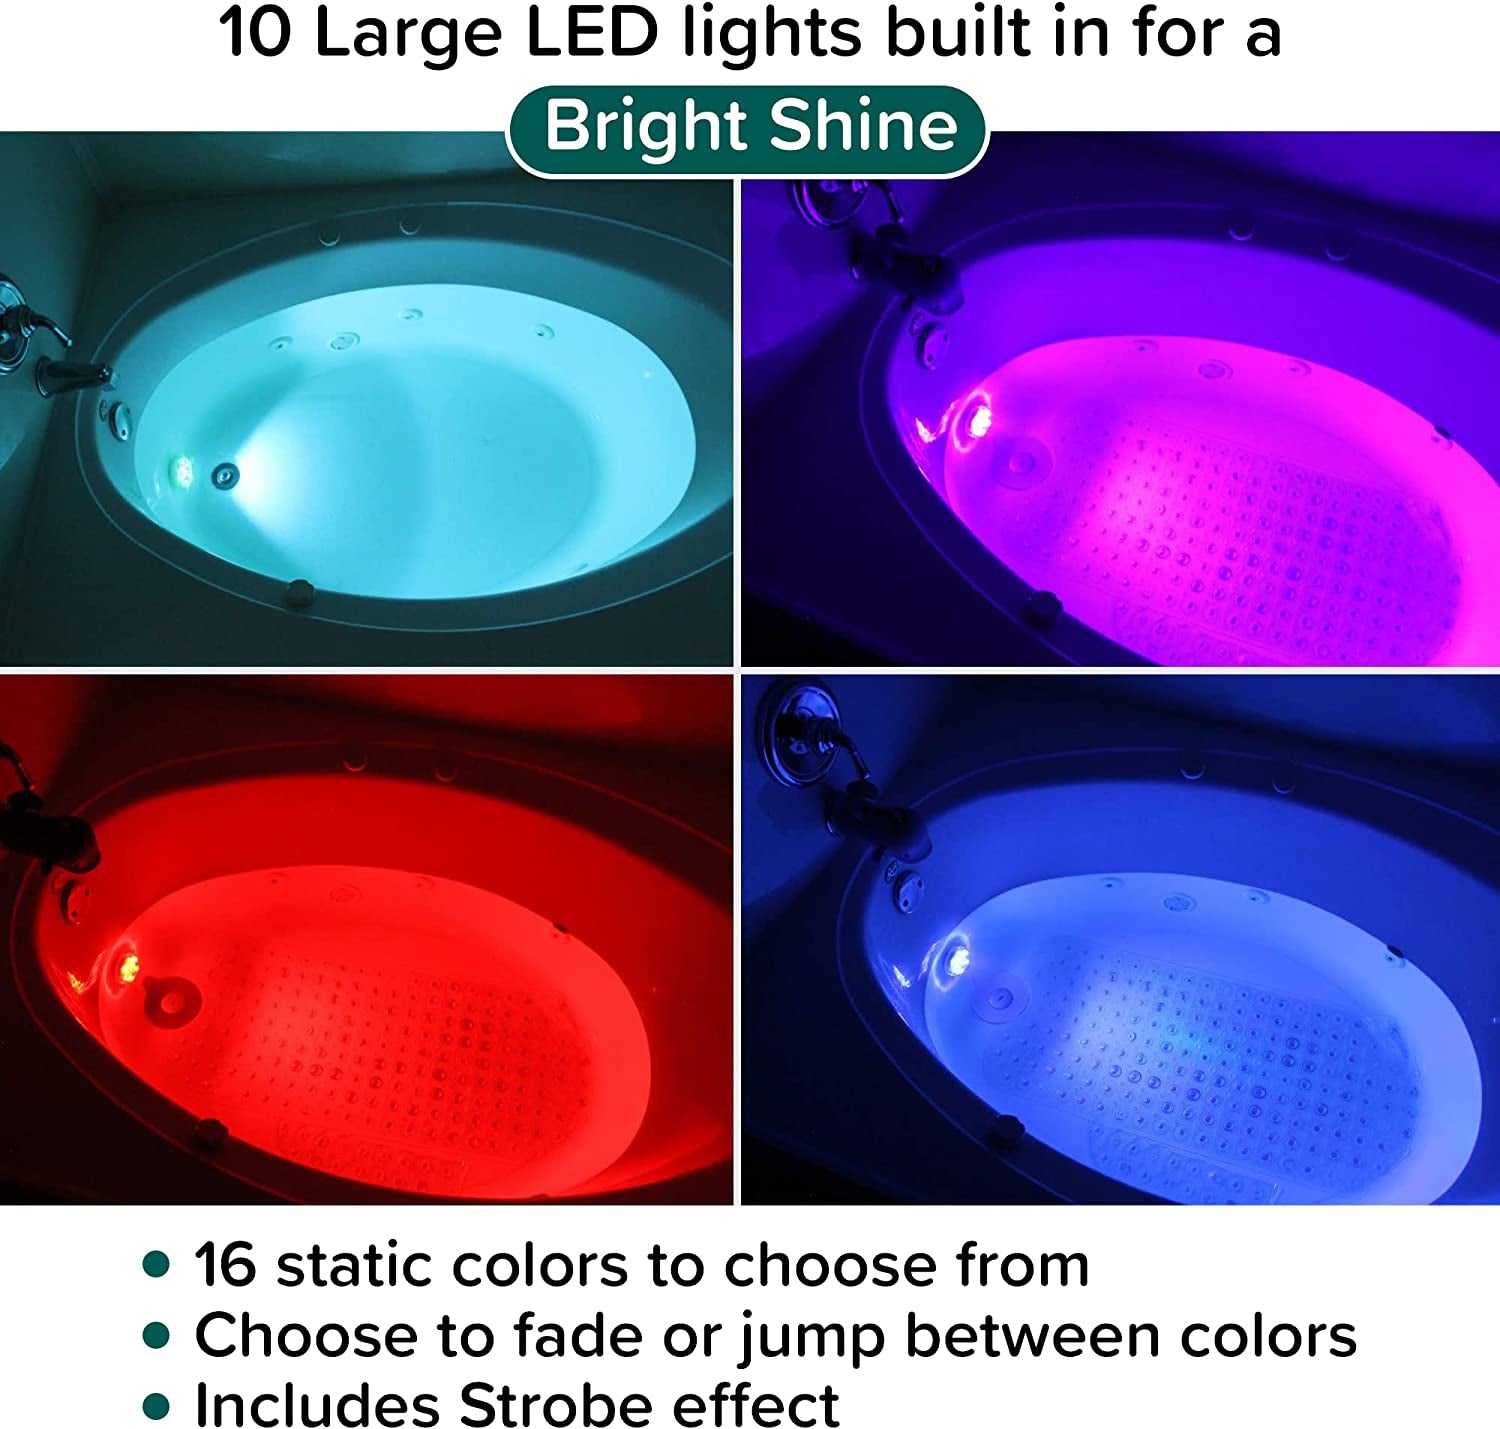 GlowTub, Glowtub Underwater Remote Controlled LED Color Changing Light for Bathtub or Spa - Battery Operated